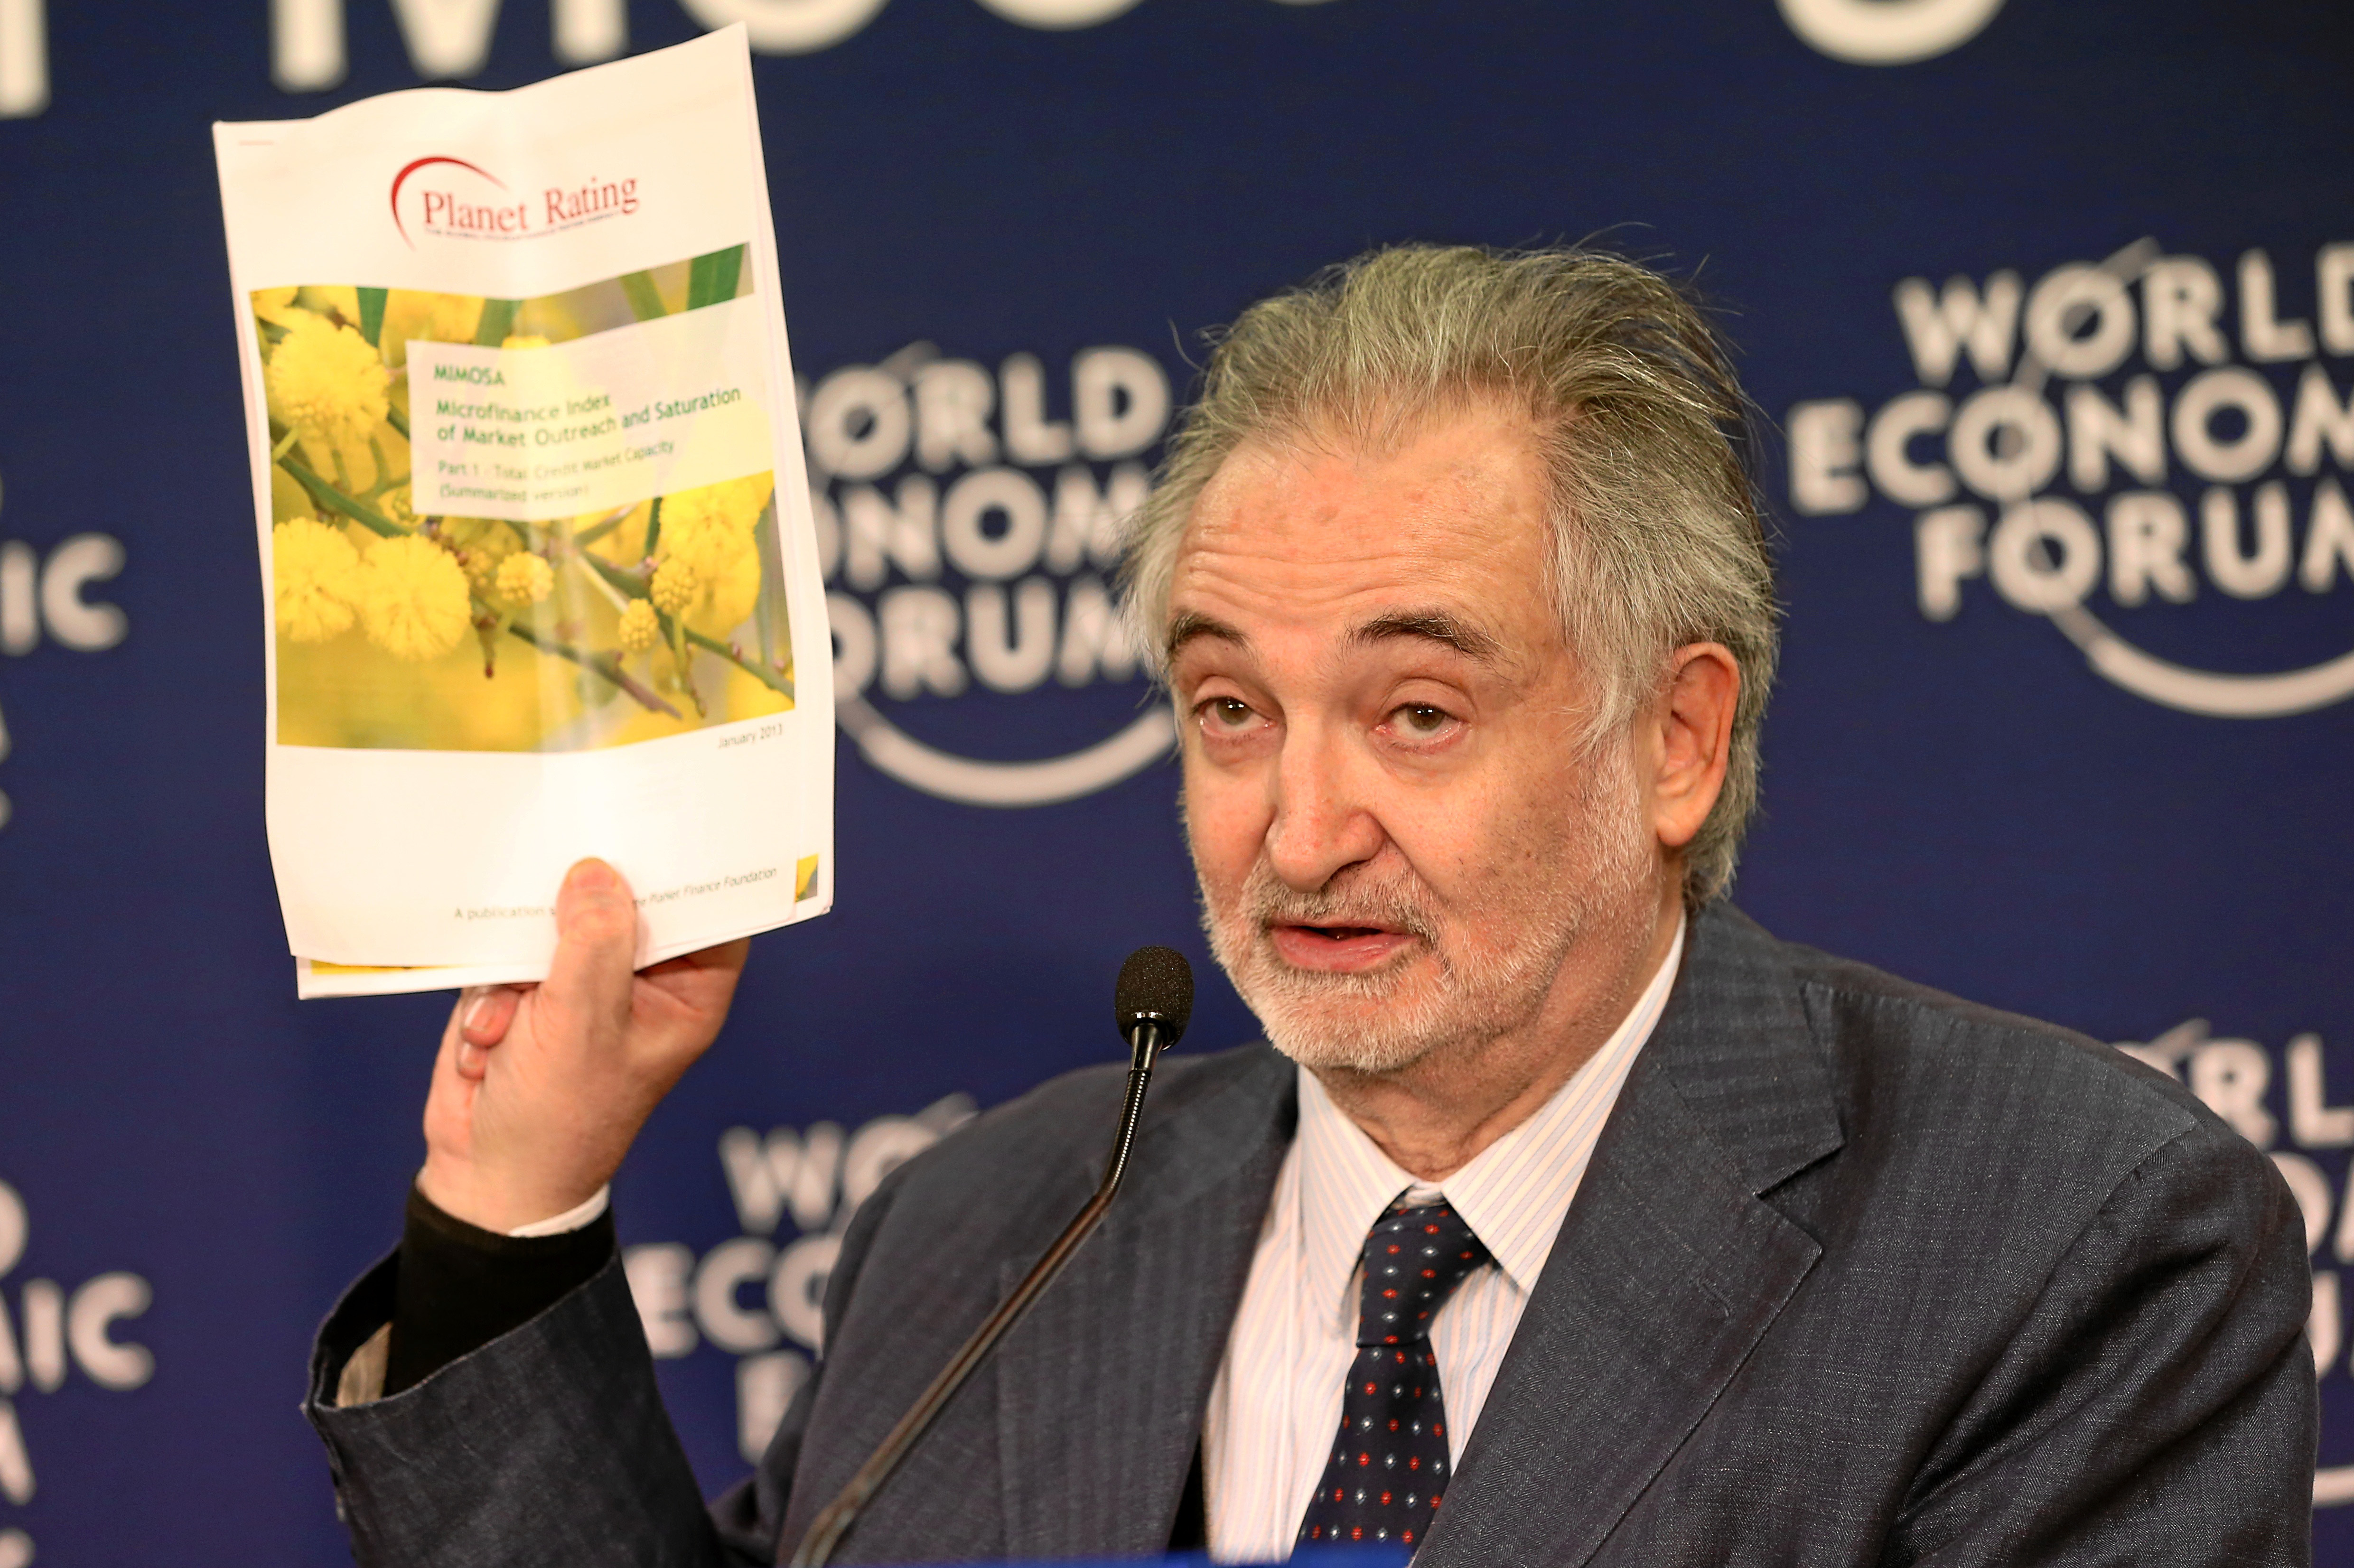 Photo : Jacques Attali au WEF Meeting 2013 de Davos - swiss-image.ch/Photo Moritz Hager (licence CC BY-NC-SA 2.0)